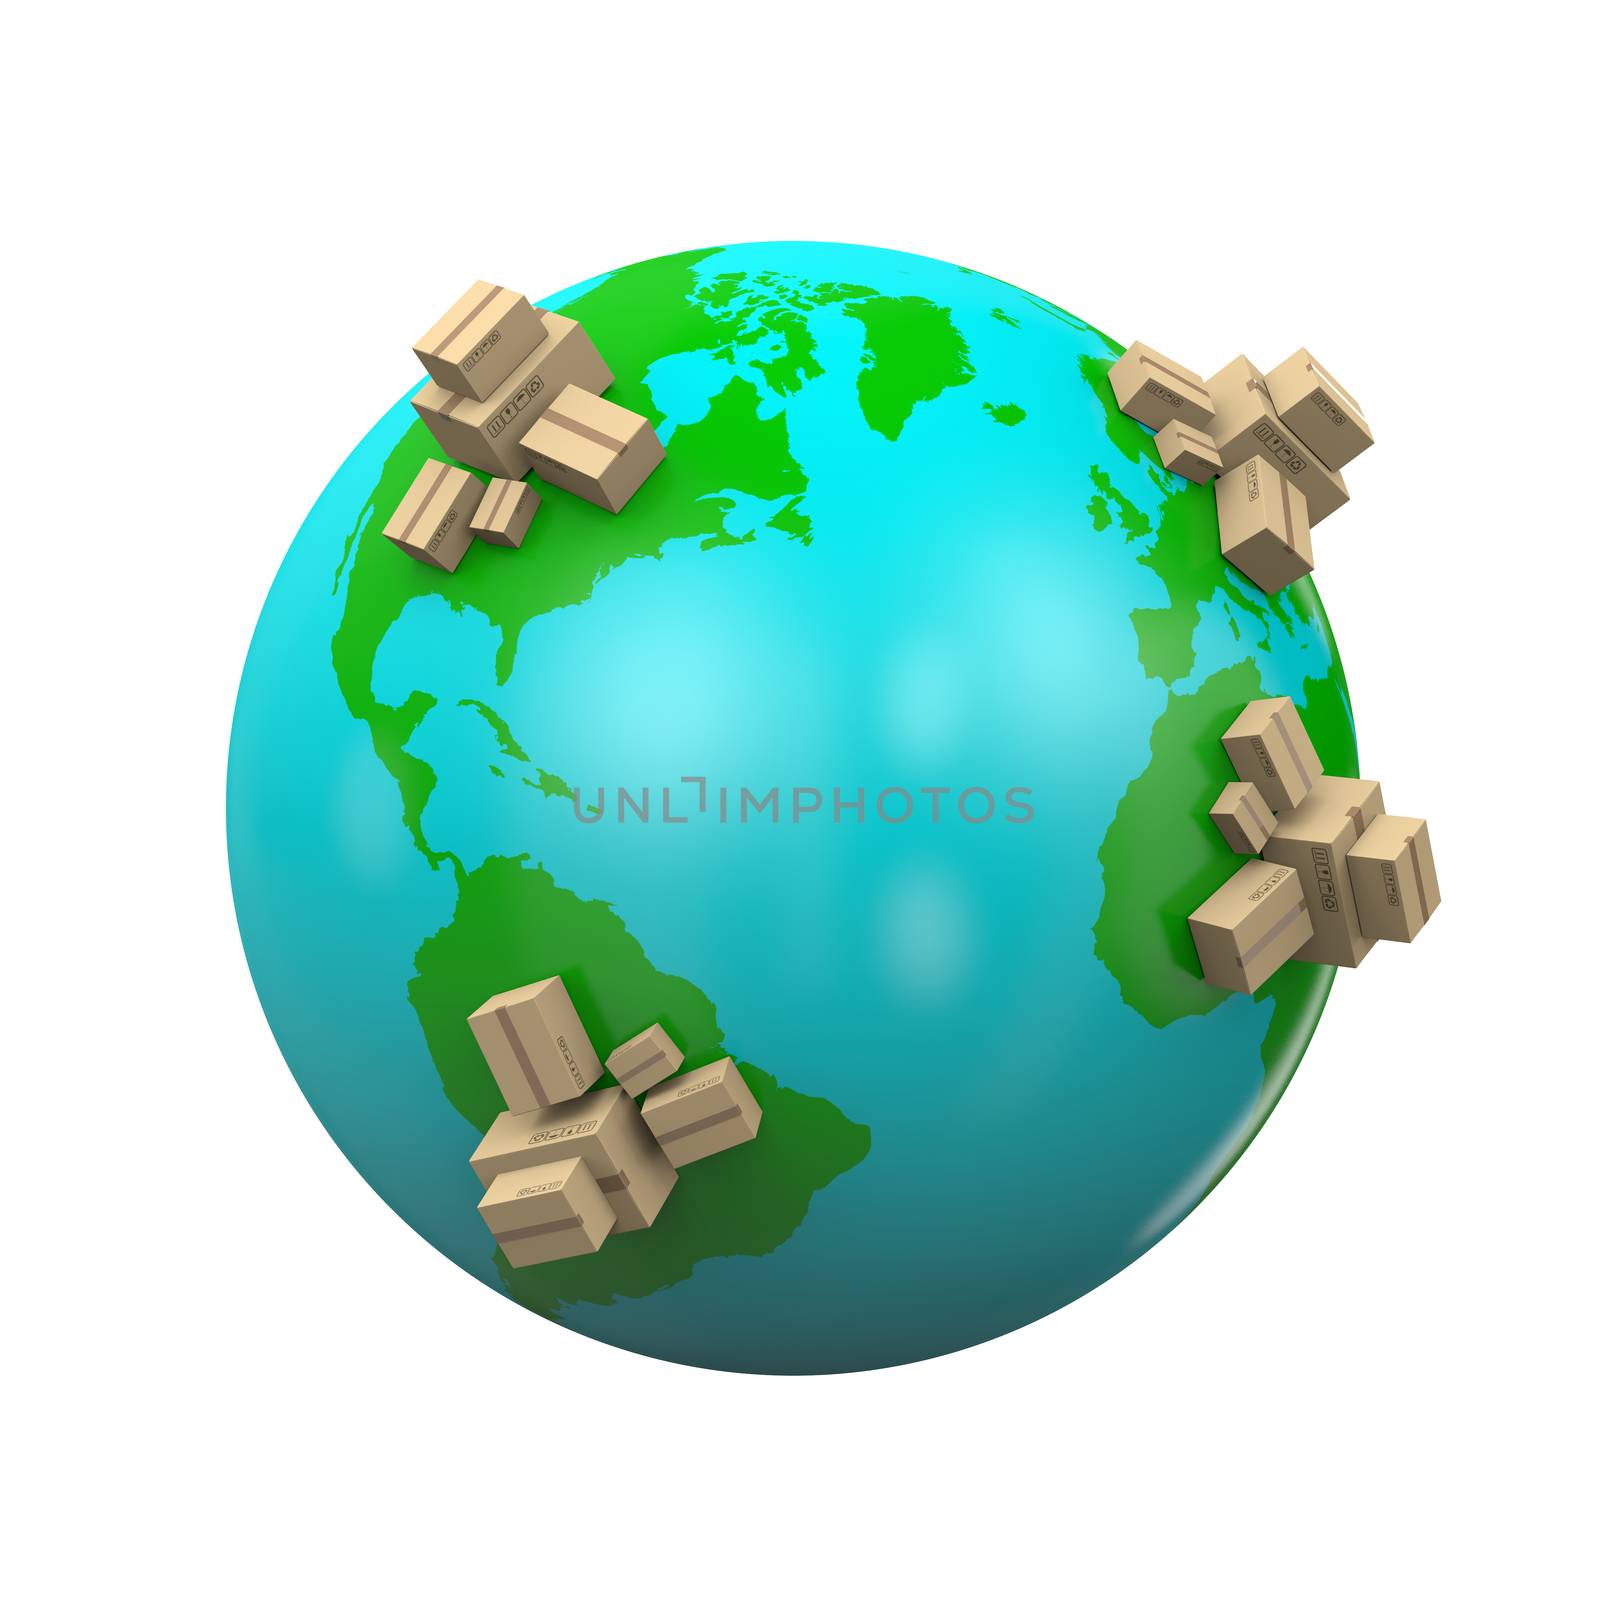 Heaps of Cardboard Boxes on the Earth 3D Illustration, Worldwide Shipping Concept